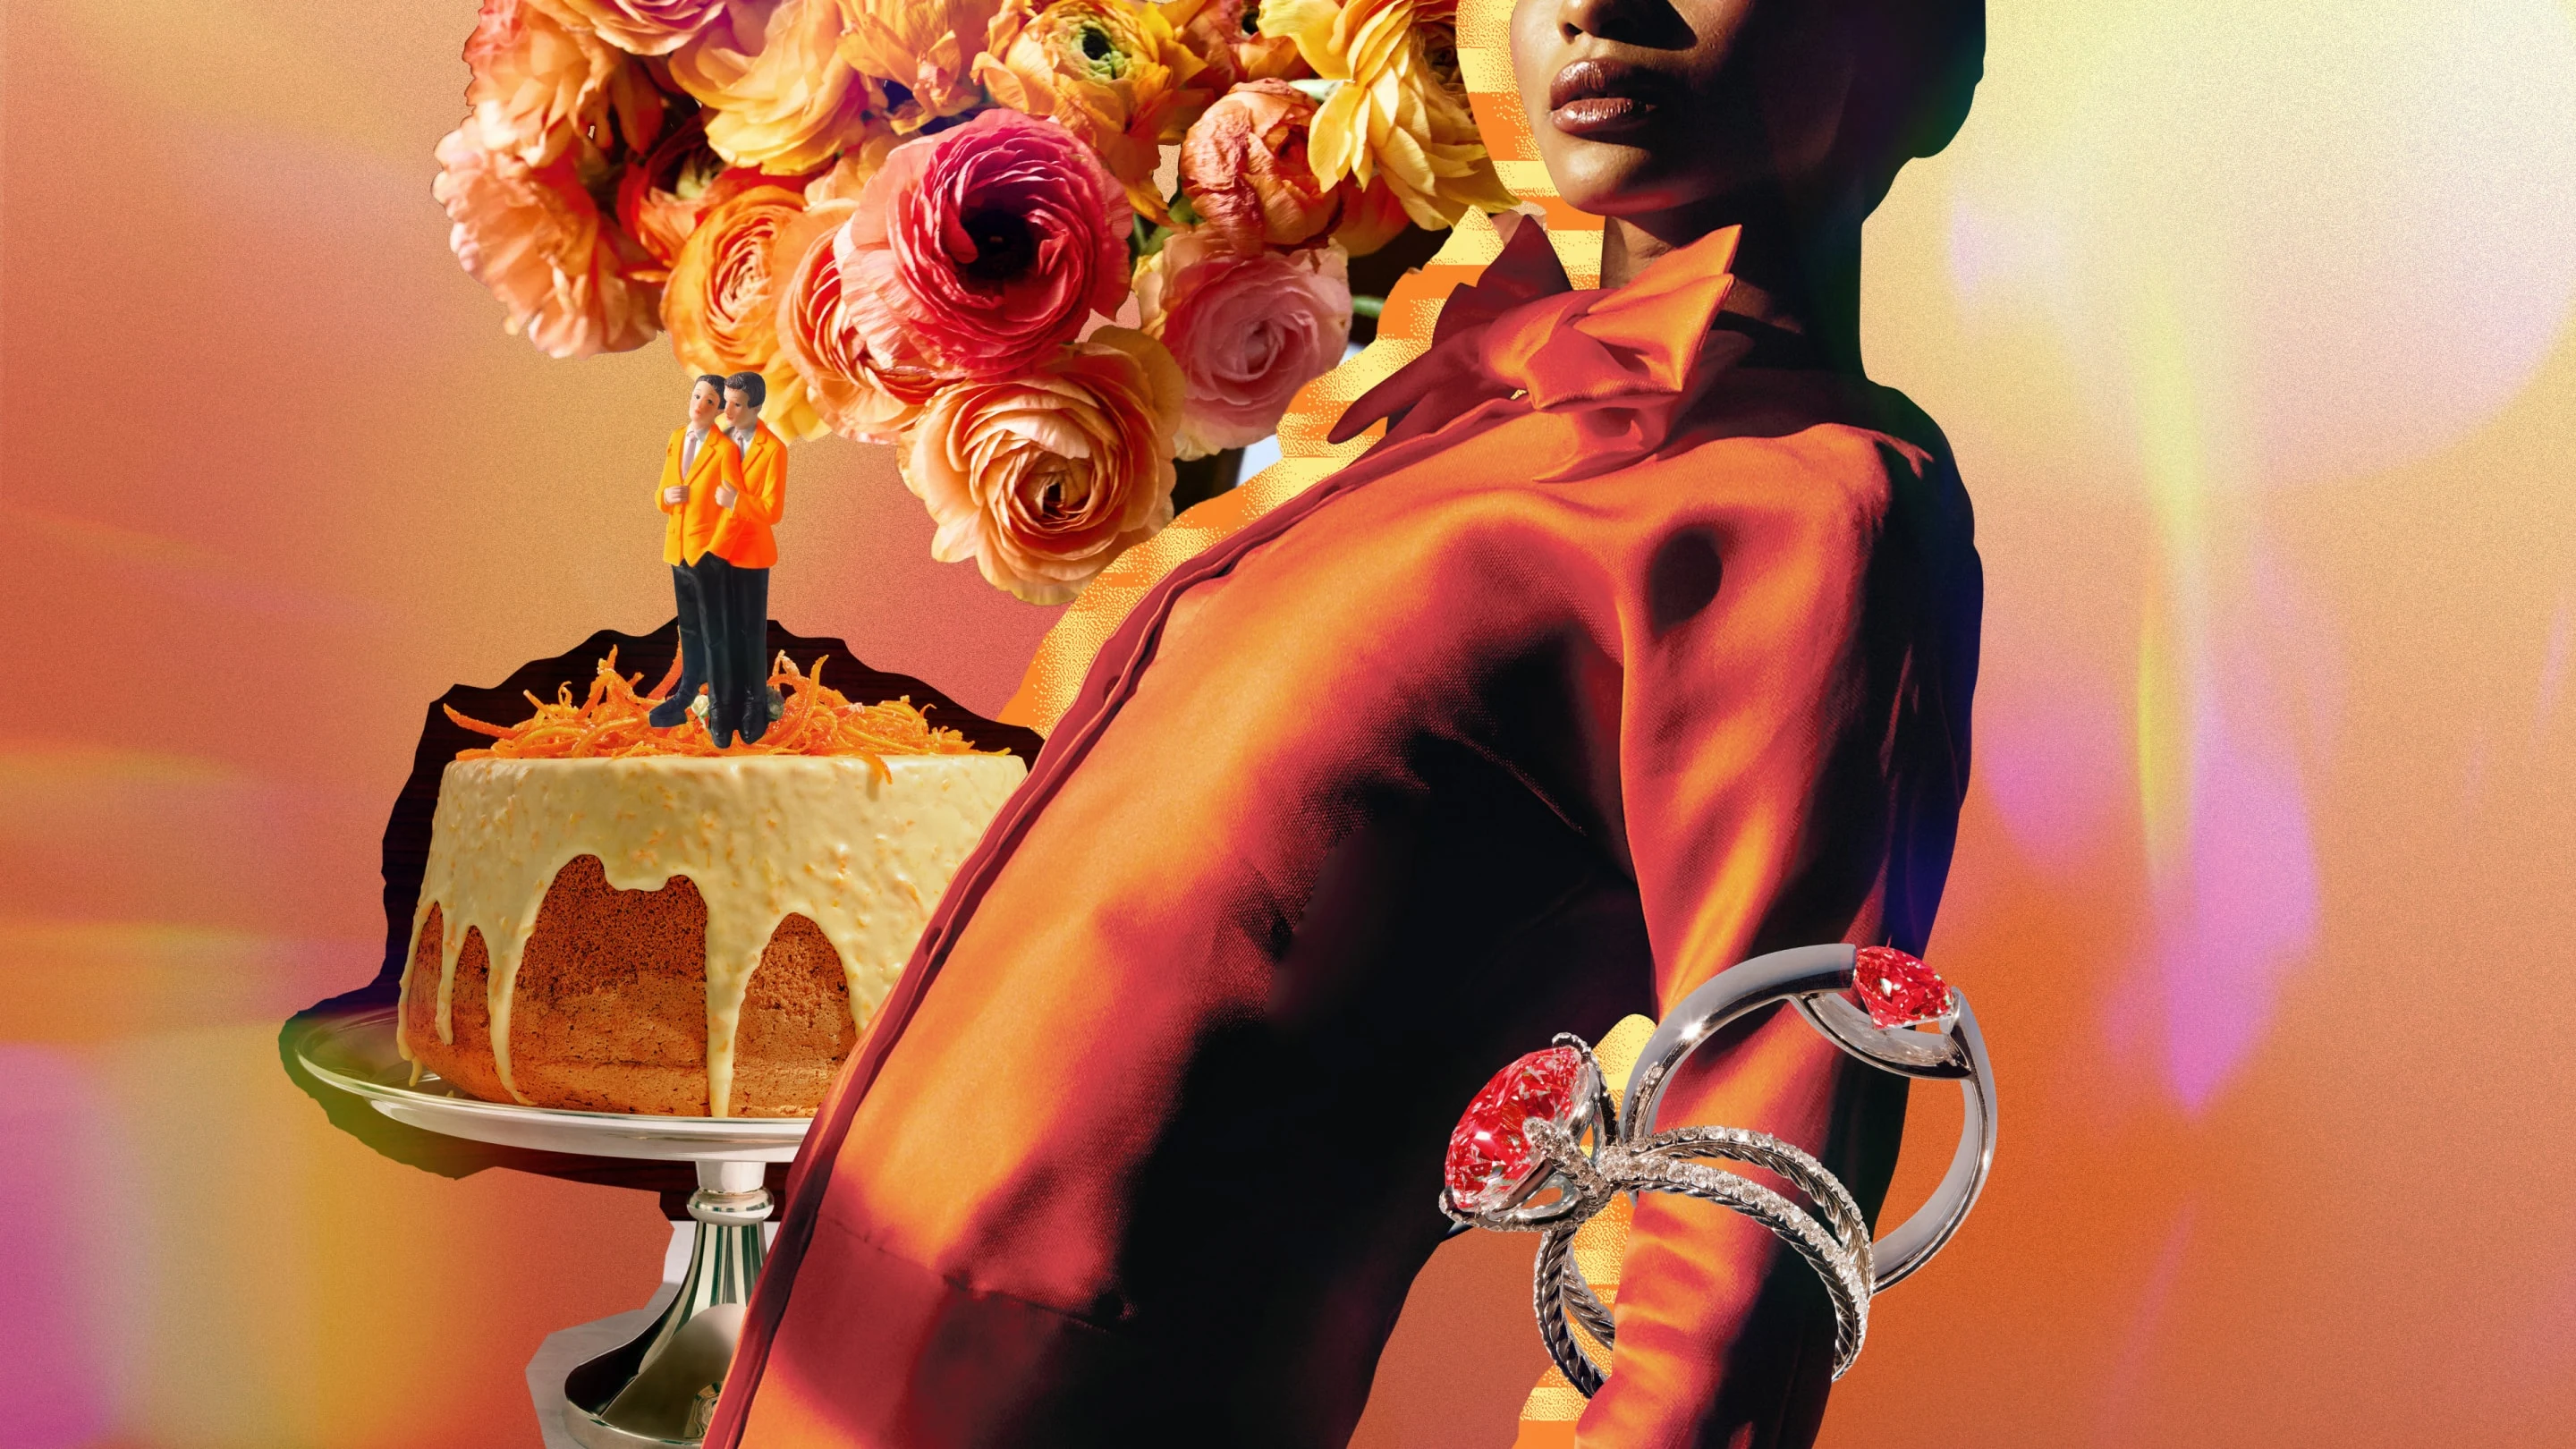 Black woman dressed in a rust-colored button up and bow tie collaged with other wedding-related objects like wedding cake, flowers and rings.